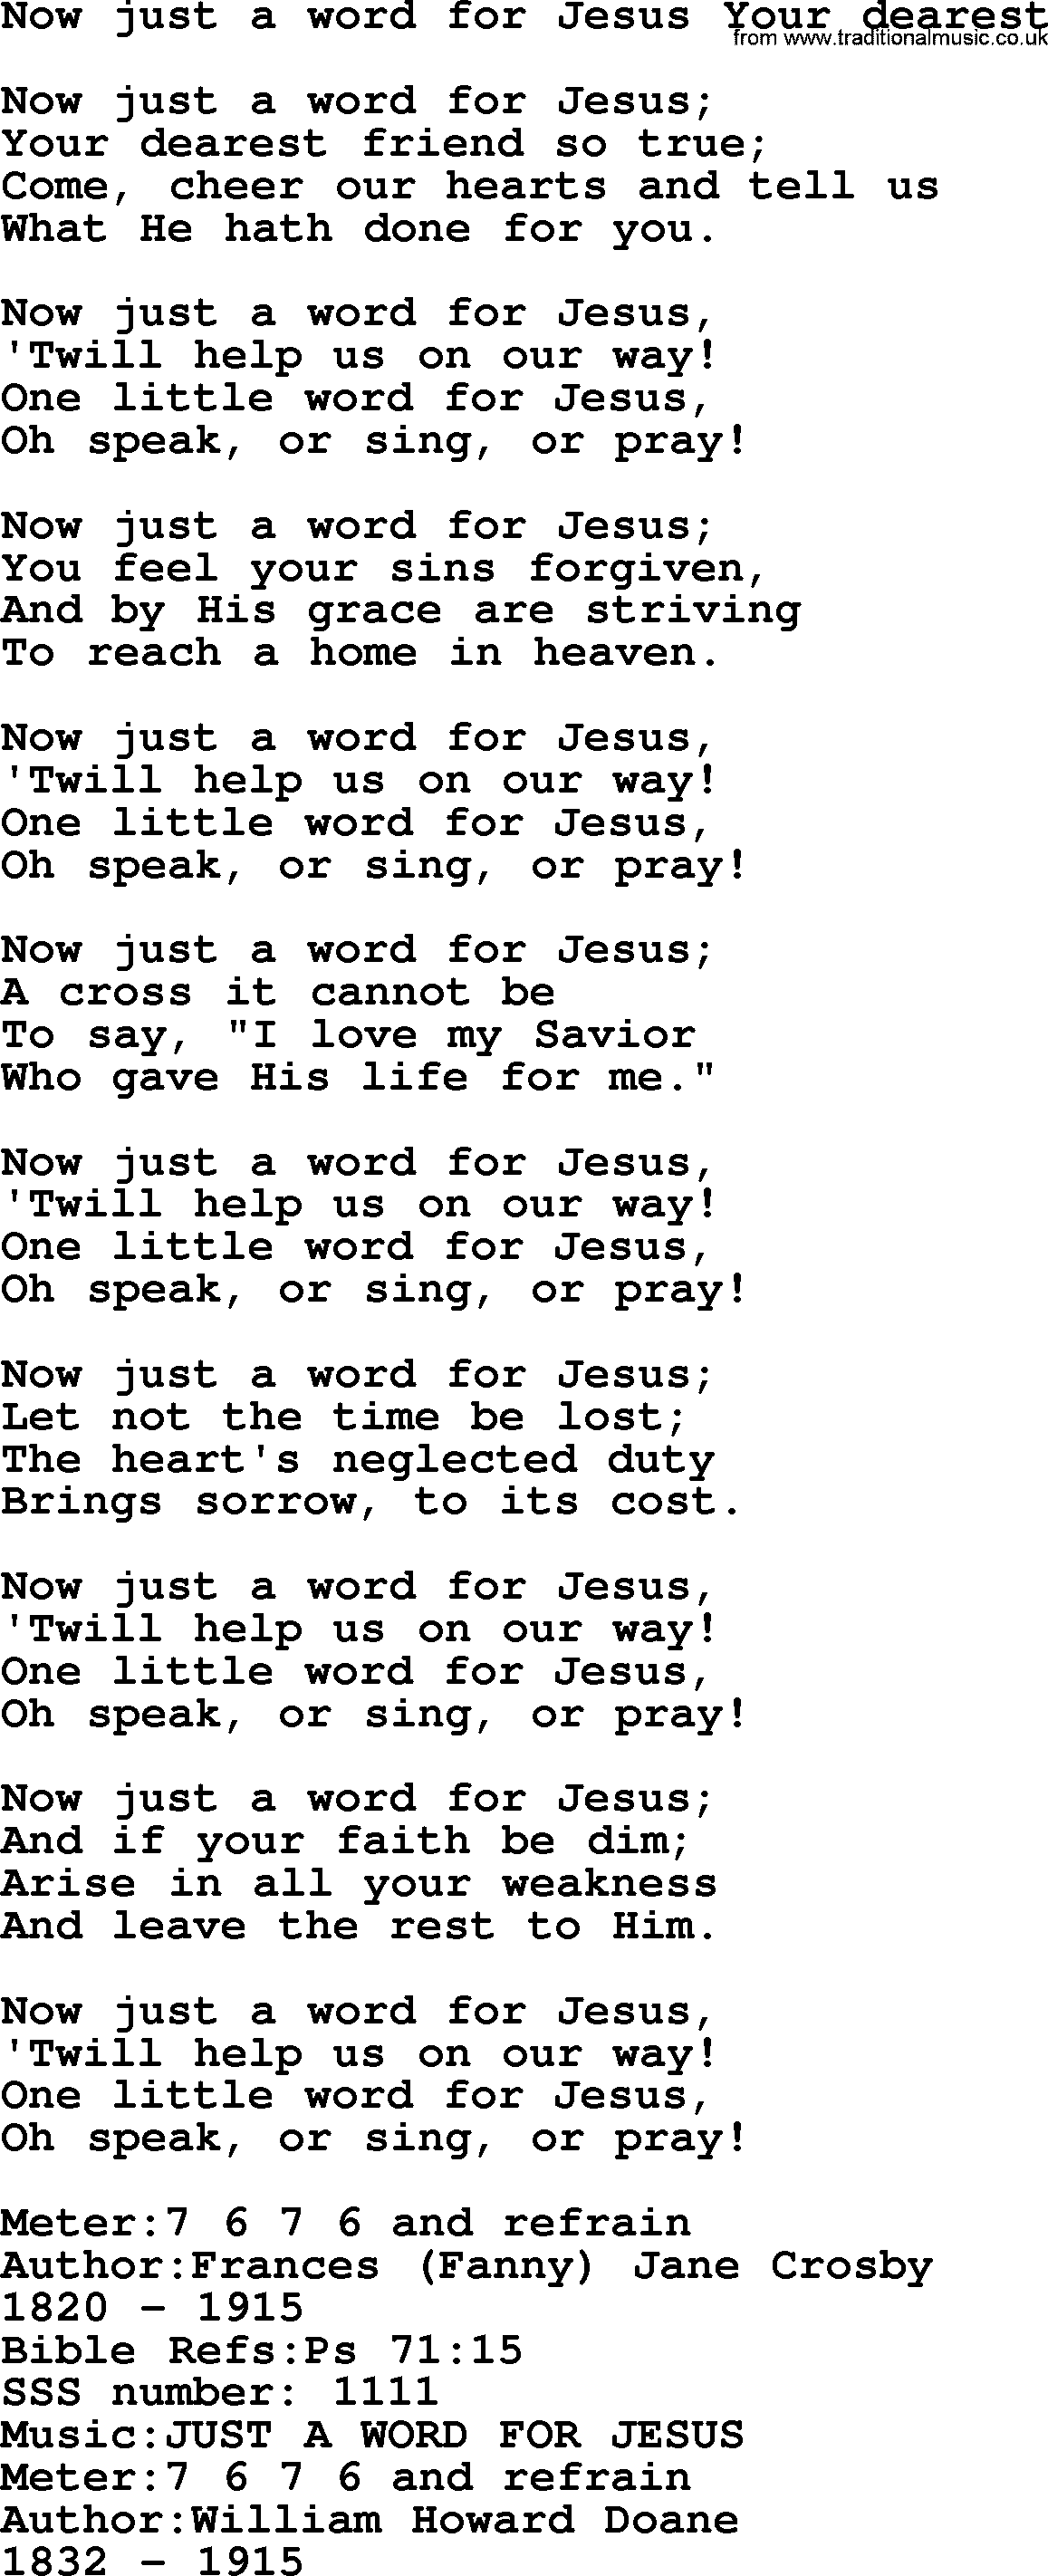 Sacred Songs and Solos complete, 1200 Hymns, title: Now Just A Word For Jesus Your Dearest, lyrics and PDF